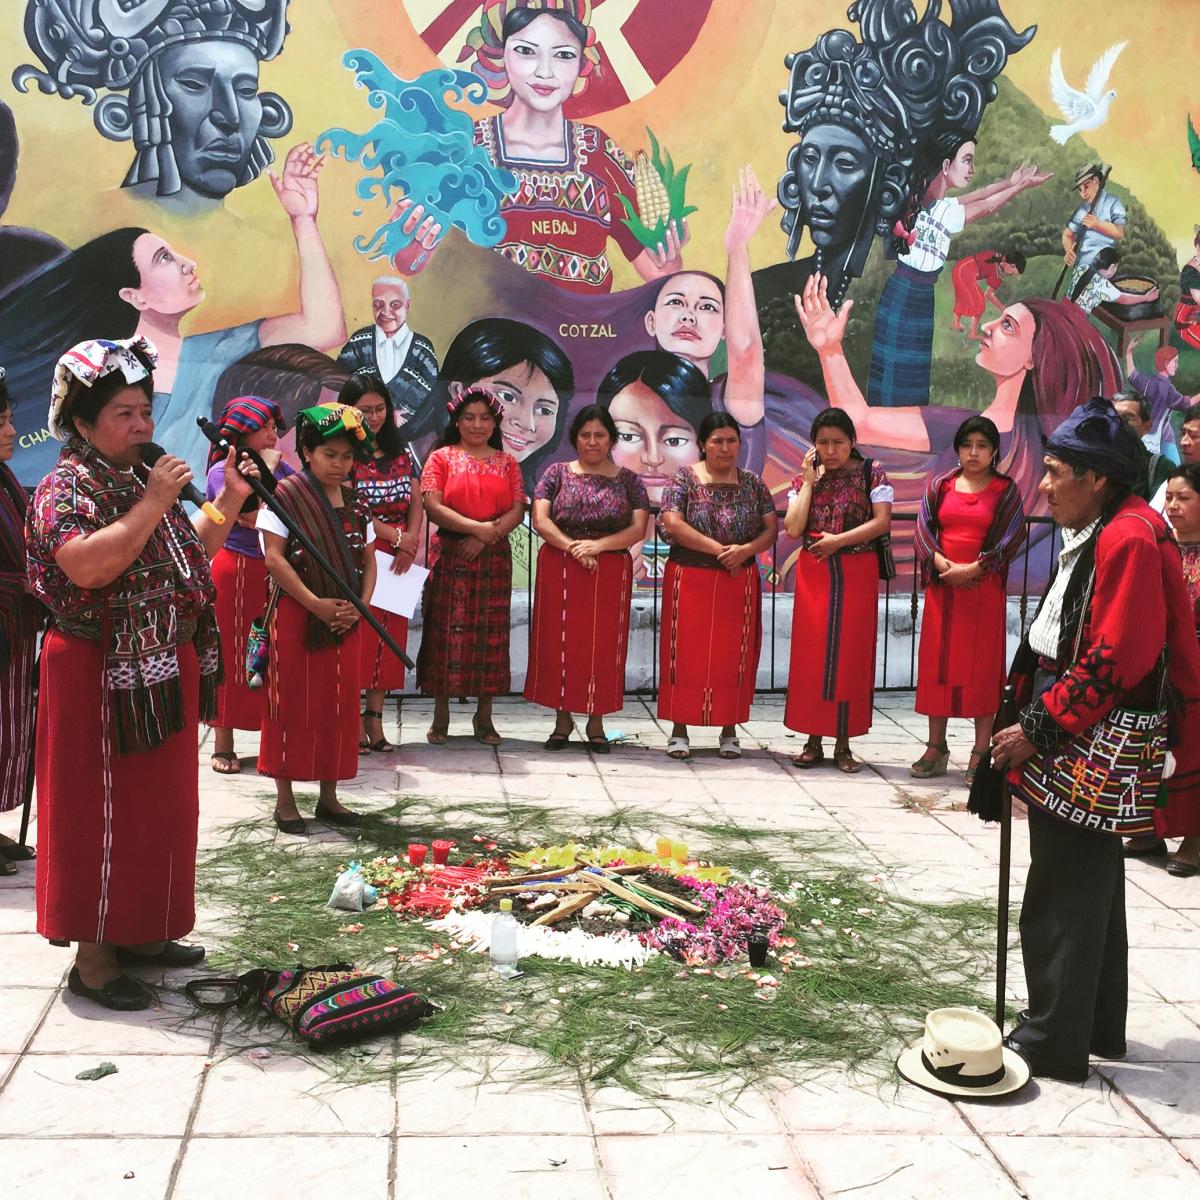 A traditional Mayan ceremony in Nebaj, Quiche, Guatemala, celebrates the launch of the “More Inclusion, Less Violence, ” election observation effort to reduce election violence and illegal campaign activity leading up to the September 6 presidential election. The photo, taken by Sara Barker the resident program manager in Guatemala, shows us that democracy means security and equal representation for marginalized groups.